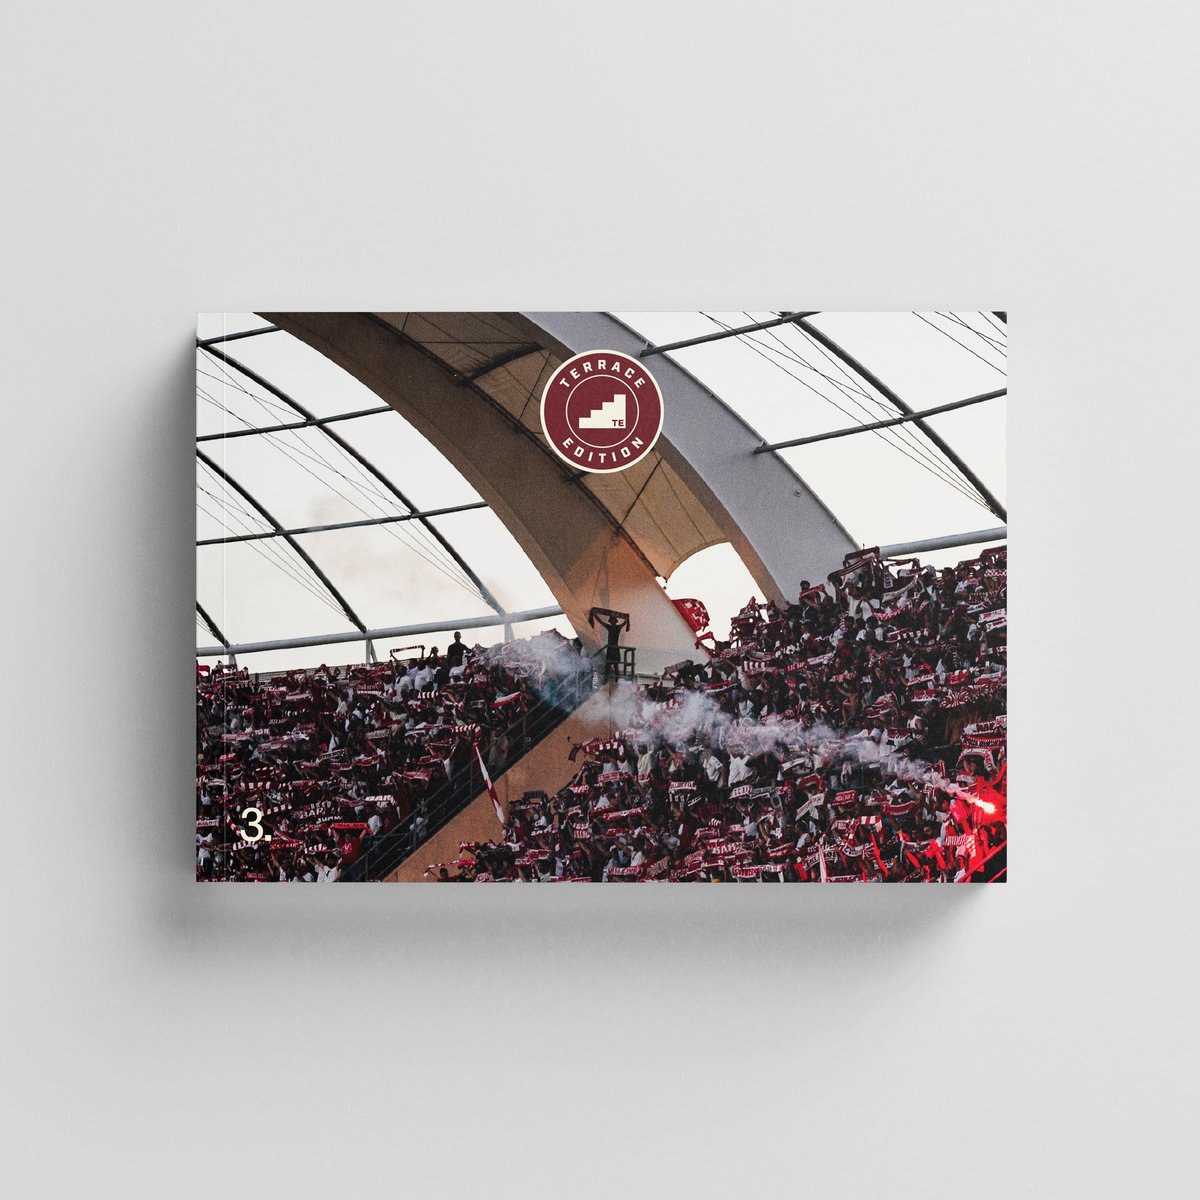 Terrace Edition Issue 3 now on pre-sale. Following the sold out Issues 1 and 2, Terrace Edition Issue 3 brings more fine photography and punchy writing from the terraces. In print. Get your copy using the link👇 terraceedition.bigcartel.com/product/terrac…